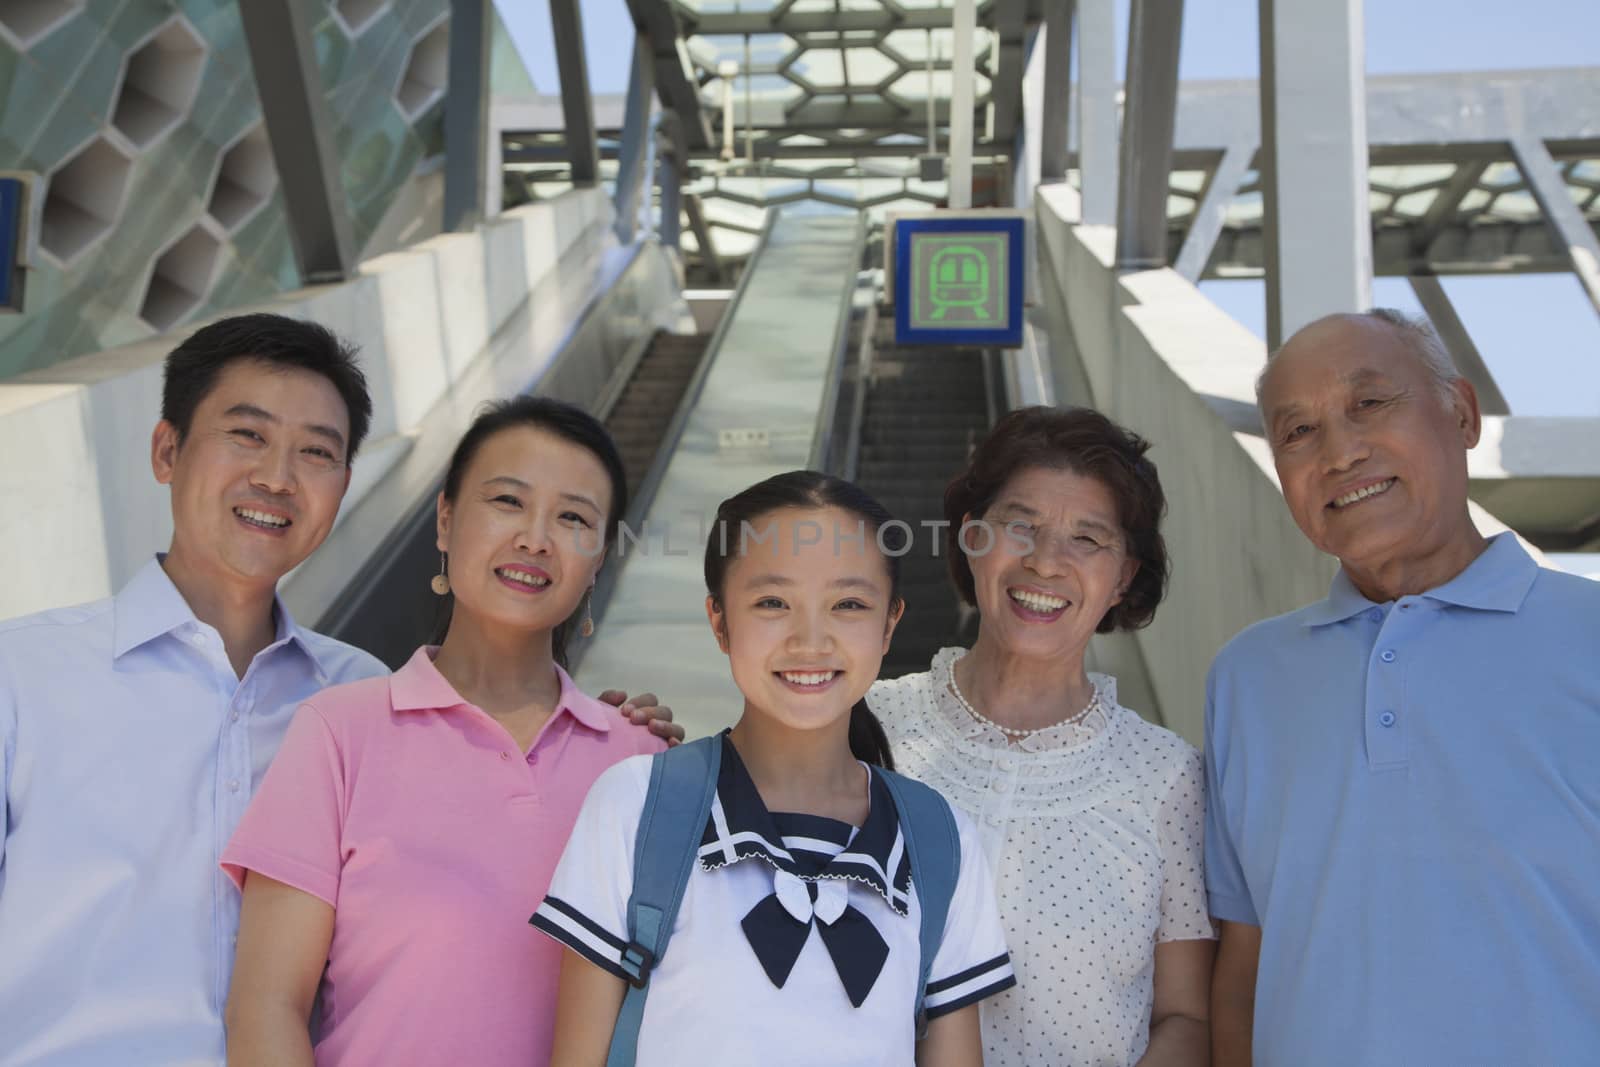 Family standing next to the escalator near the subway station by XiXinXing